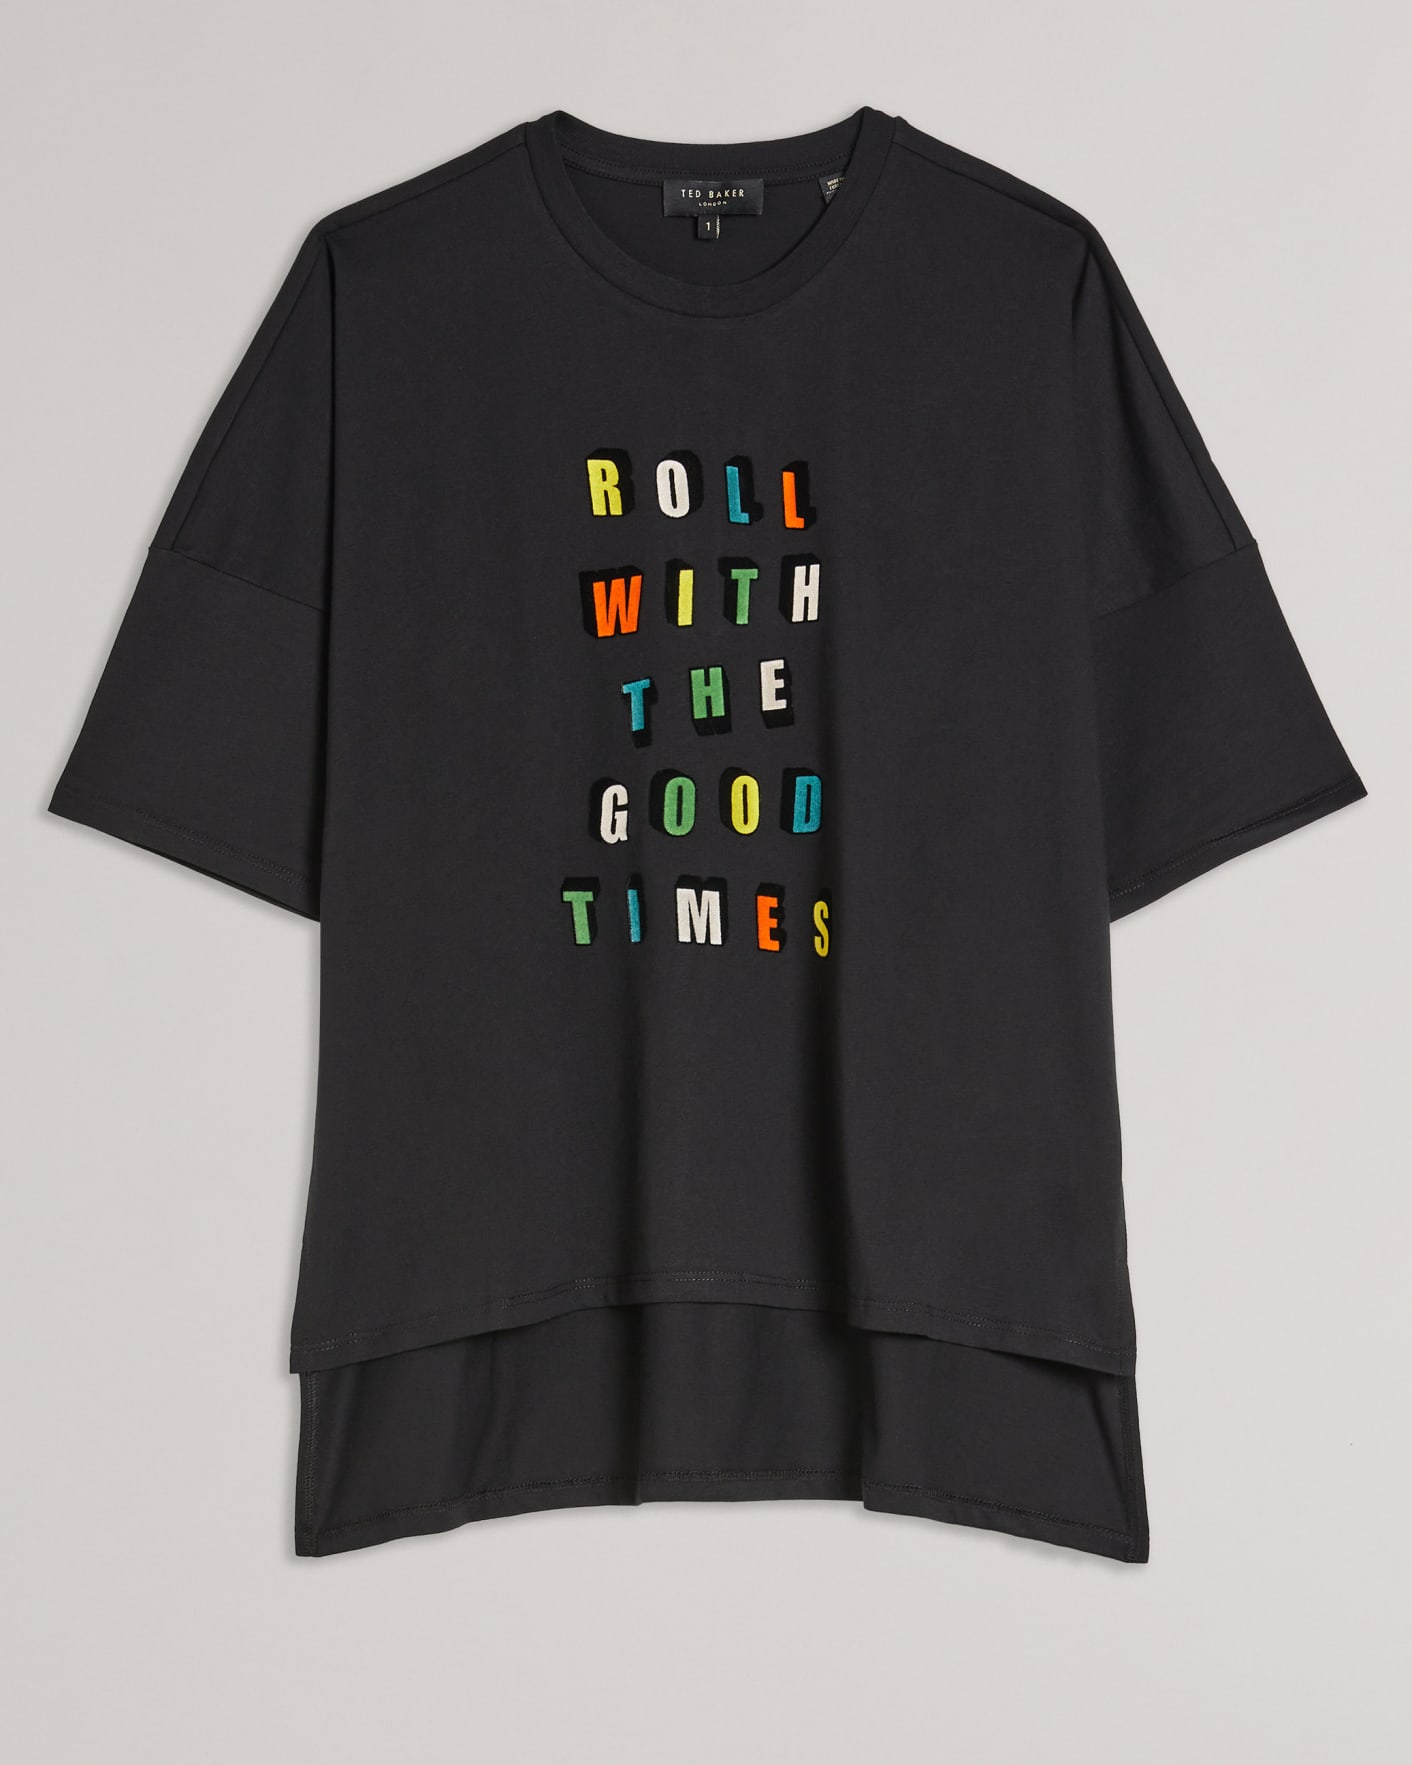 Black Good Times graphic tee Ted Baker